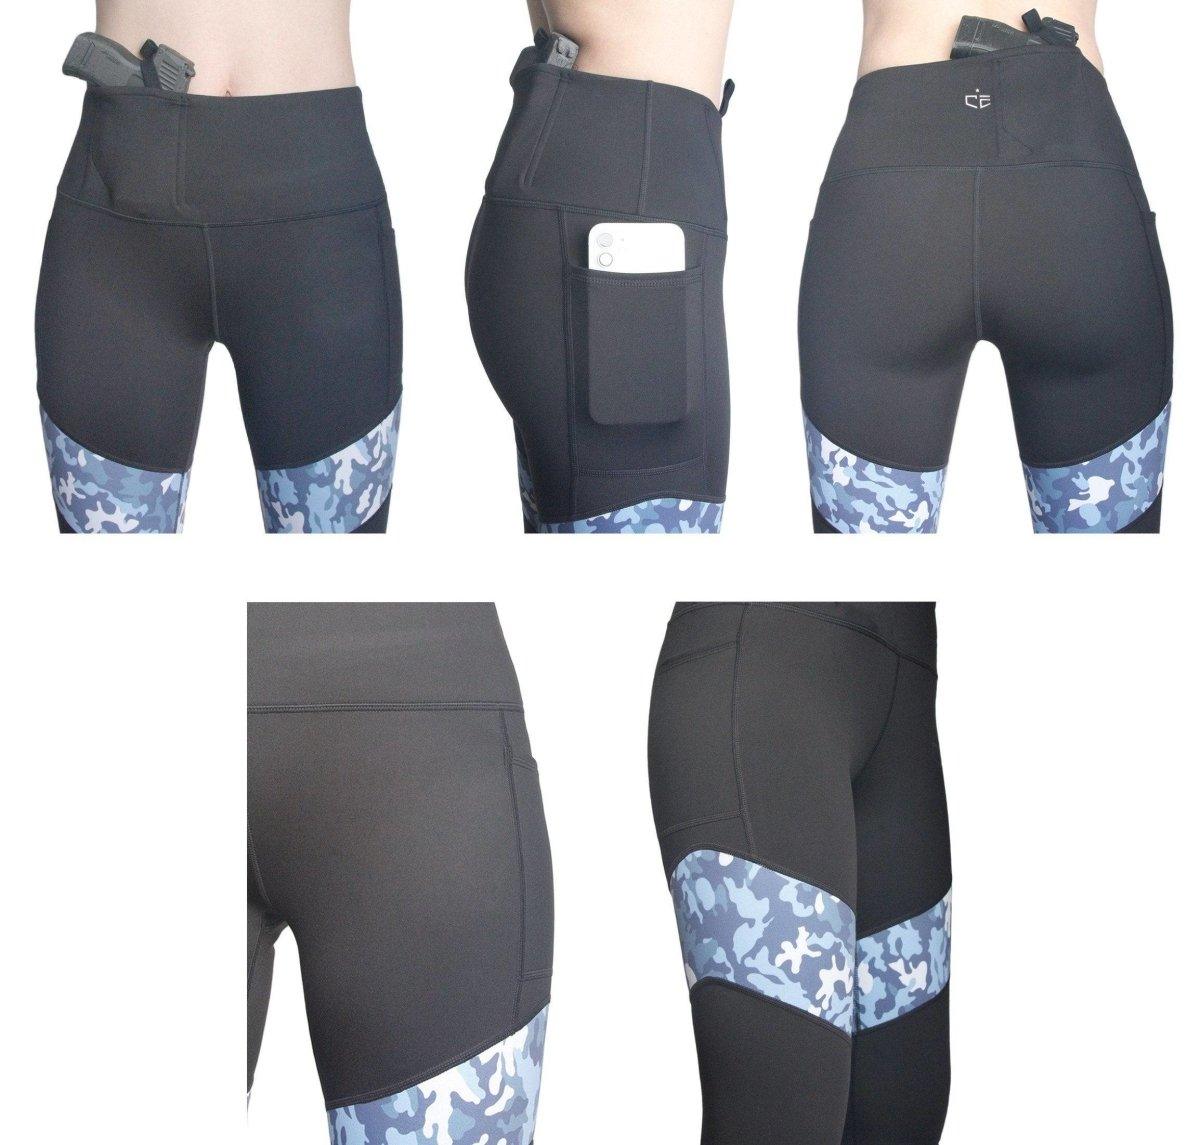 Concealed Carry Leggings Comparison and Review